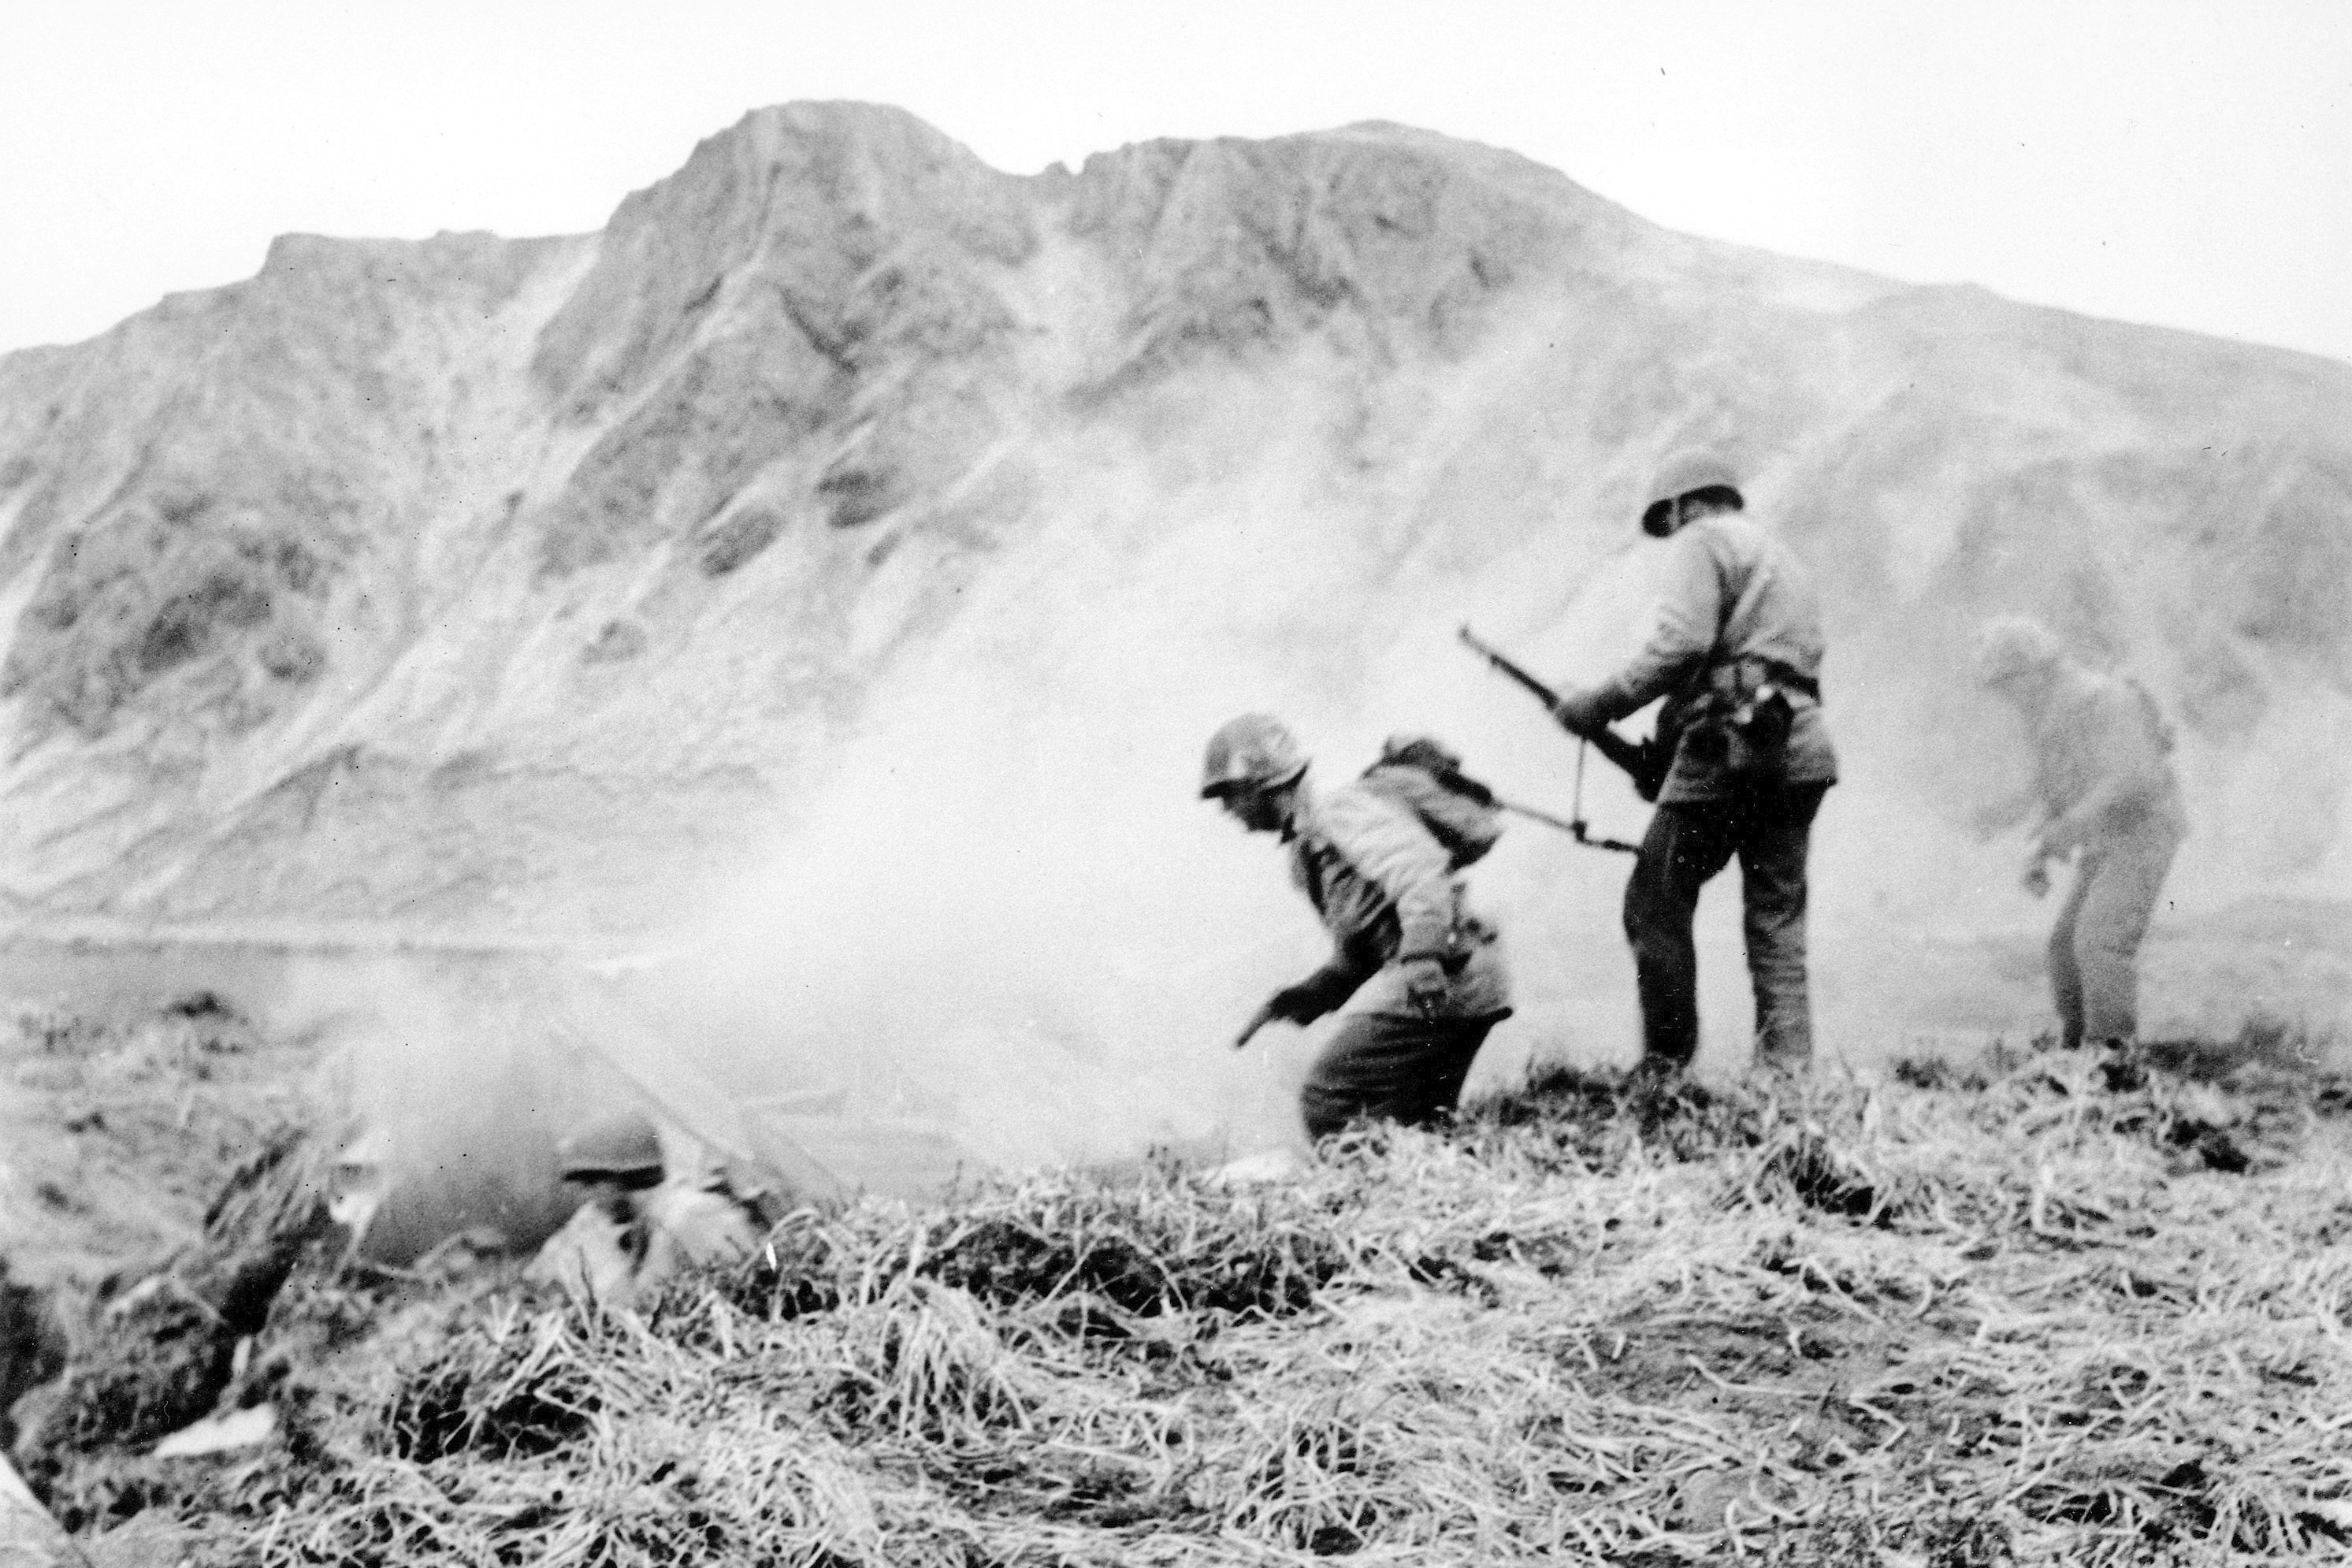 A US squad armed with guns and hand grenades closes in on Japanese holdouts entrenched in dugouts on Attu Island, Alaska, in June 1943 during World War II. Photo: US Army via AP